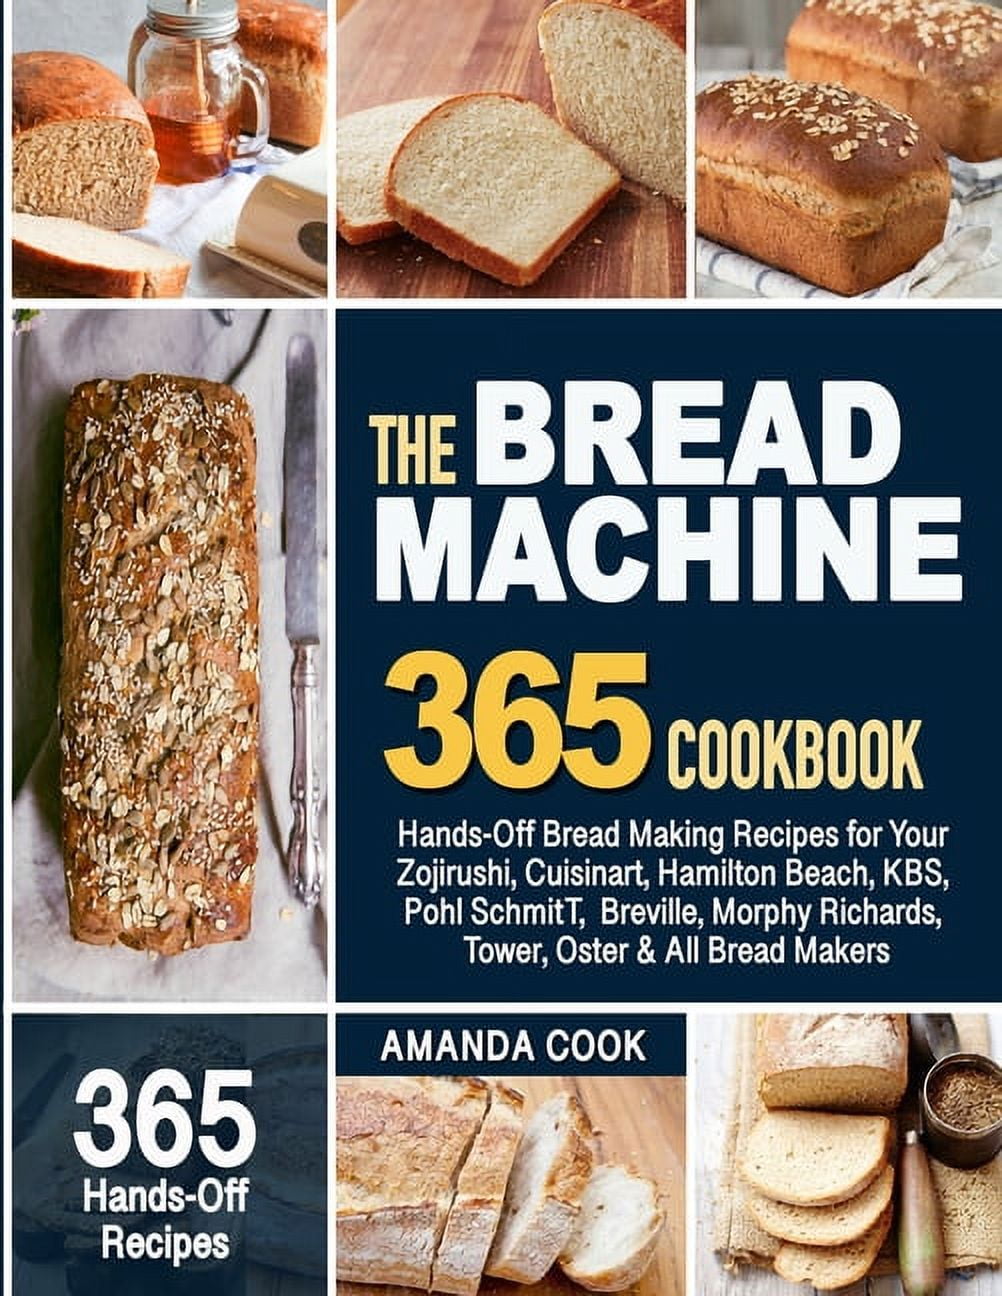 The Elite Gourmet Bread Machine Cookbook: 80 Easy, Foolproof & Hands-Off  Recipes for Perfect Homemade Bread. Include 21-Day Meal Plan. (Paperback)